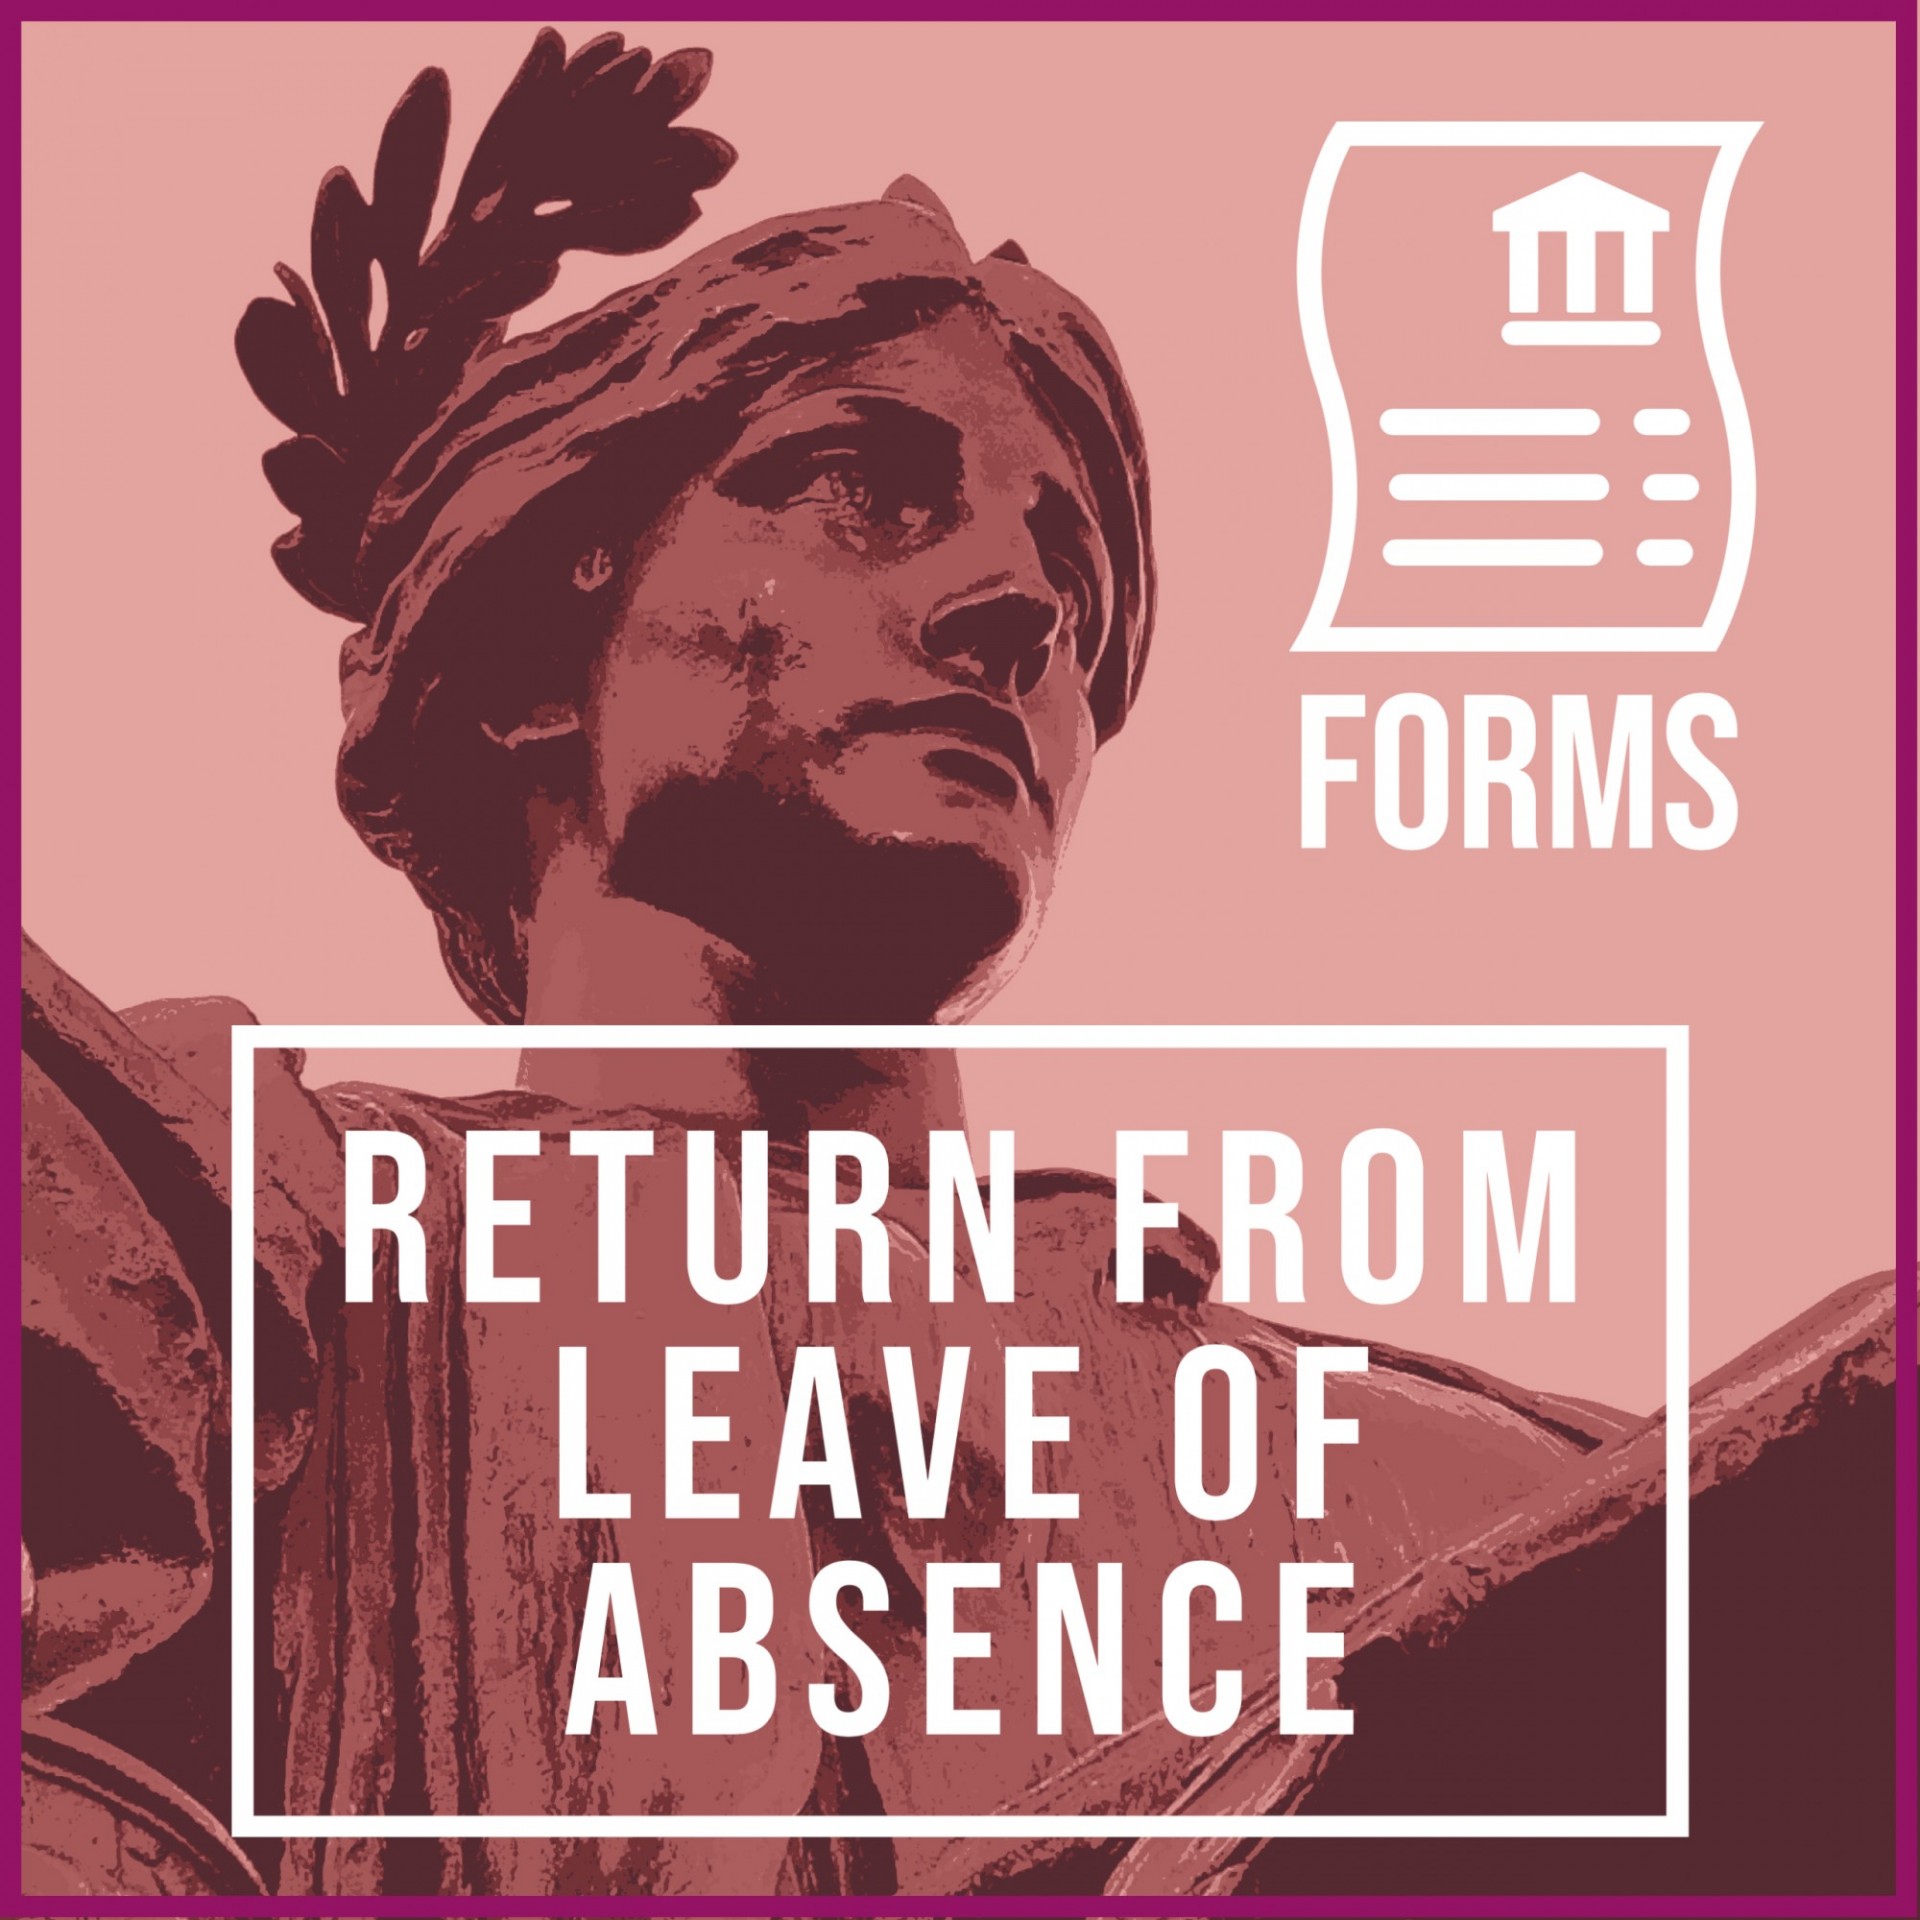 Forms Icon: Return from Leave of Absence